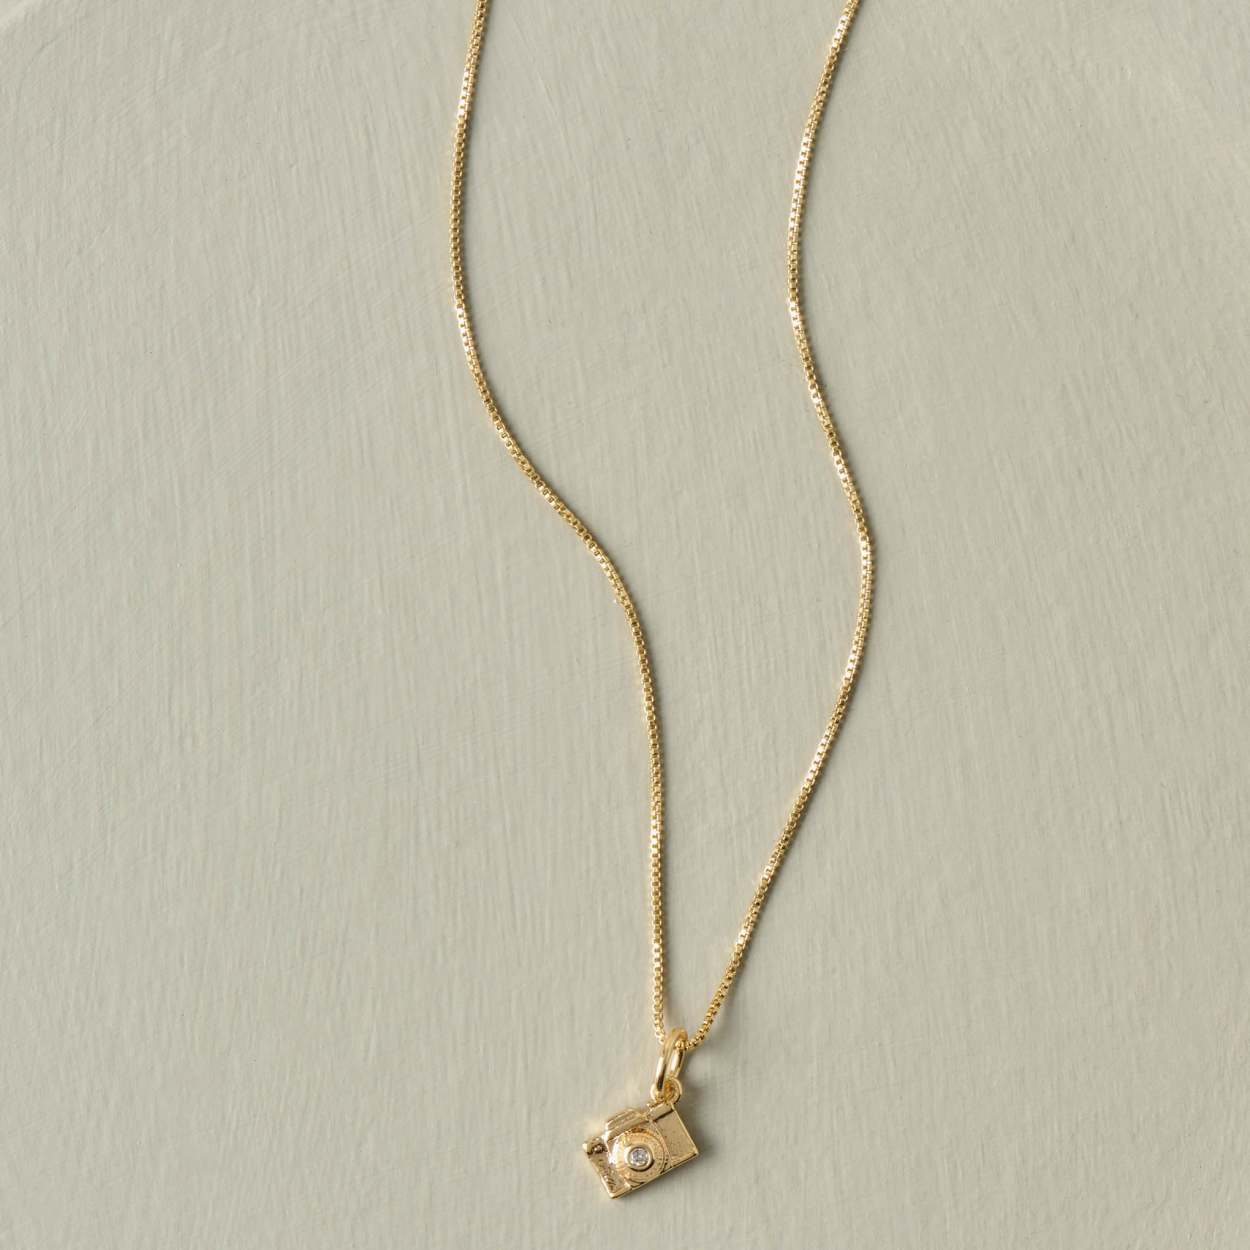 Camera Gold Chain Necklace